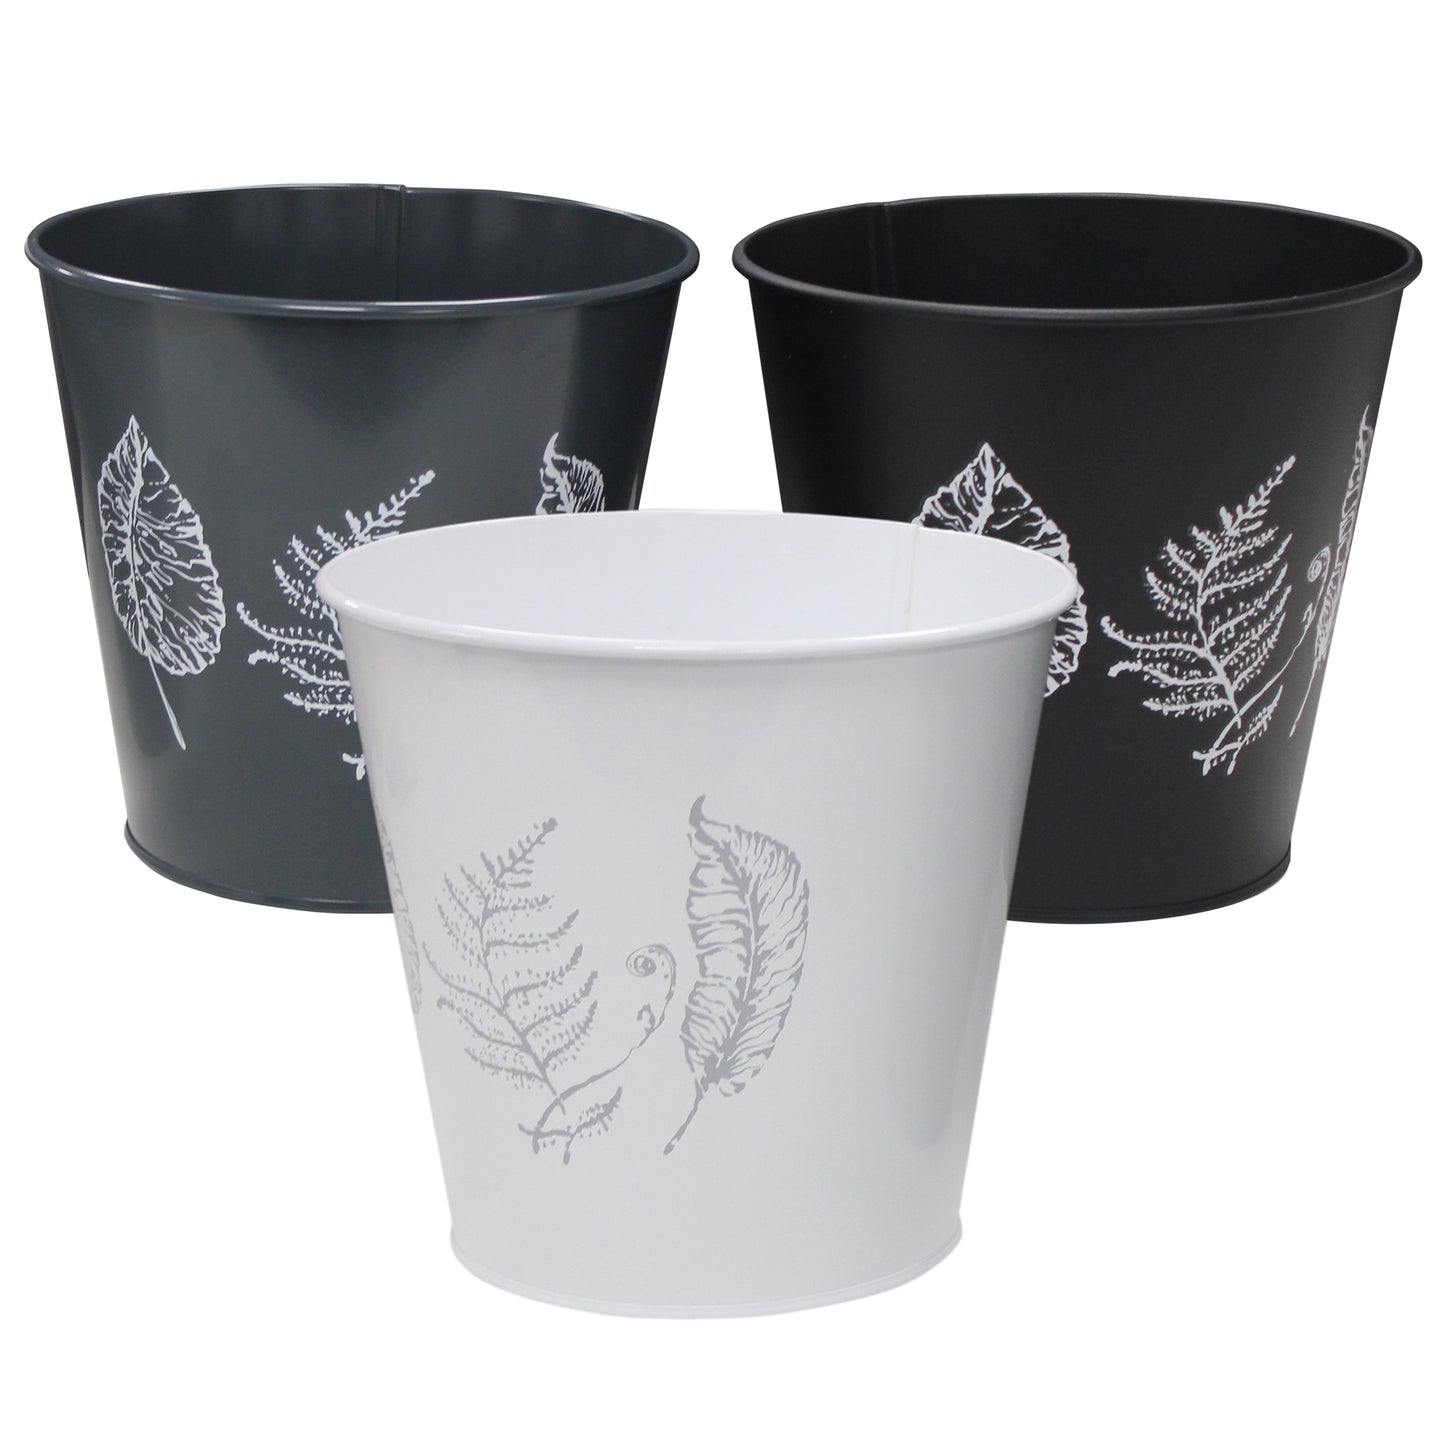 Garden Plant Pots and Planters with Leaf Prints, 7 Litres - 3 Colours Available